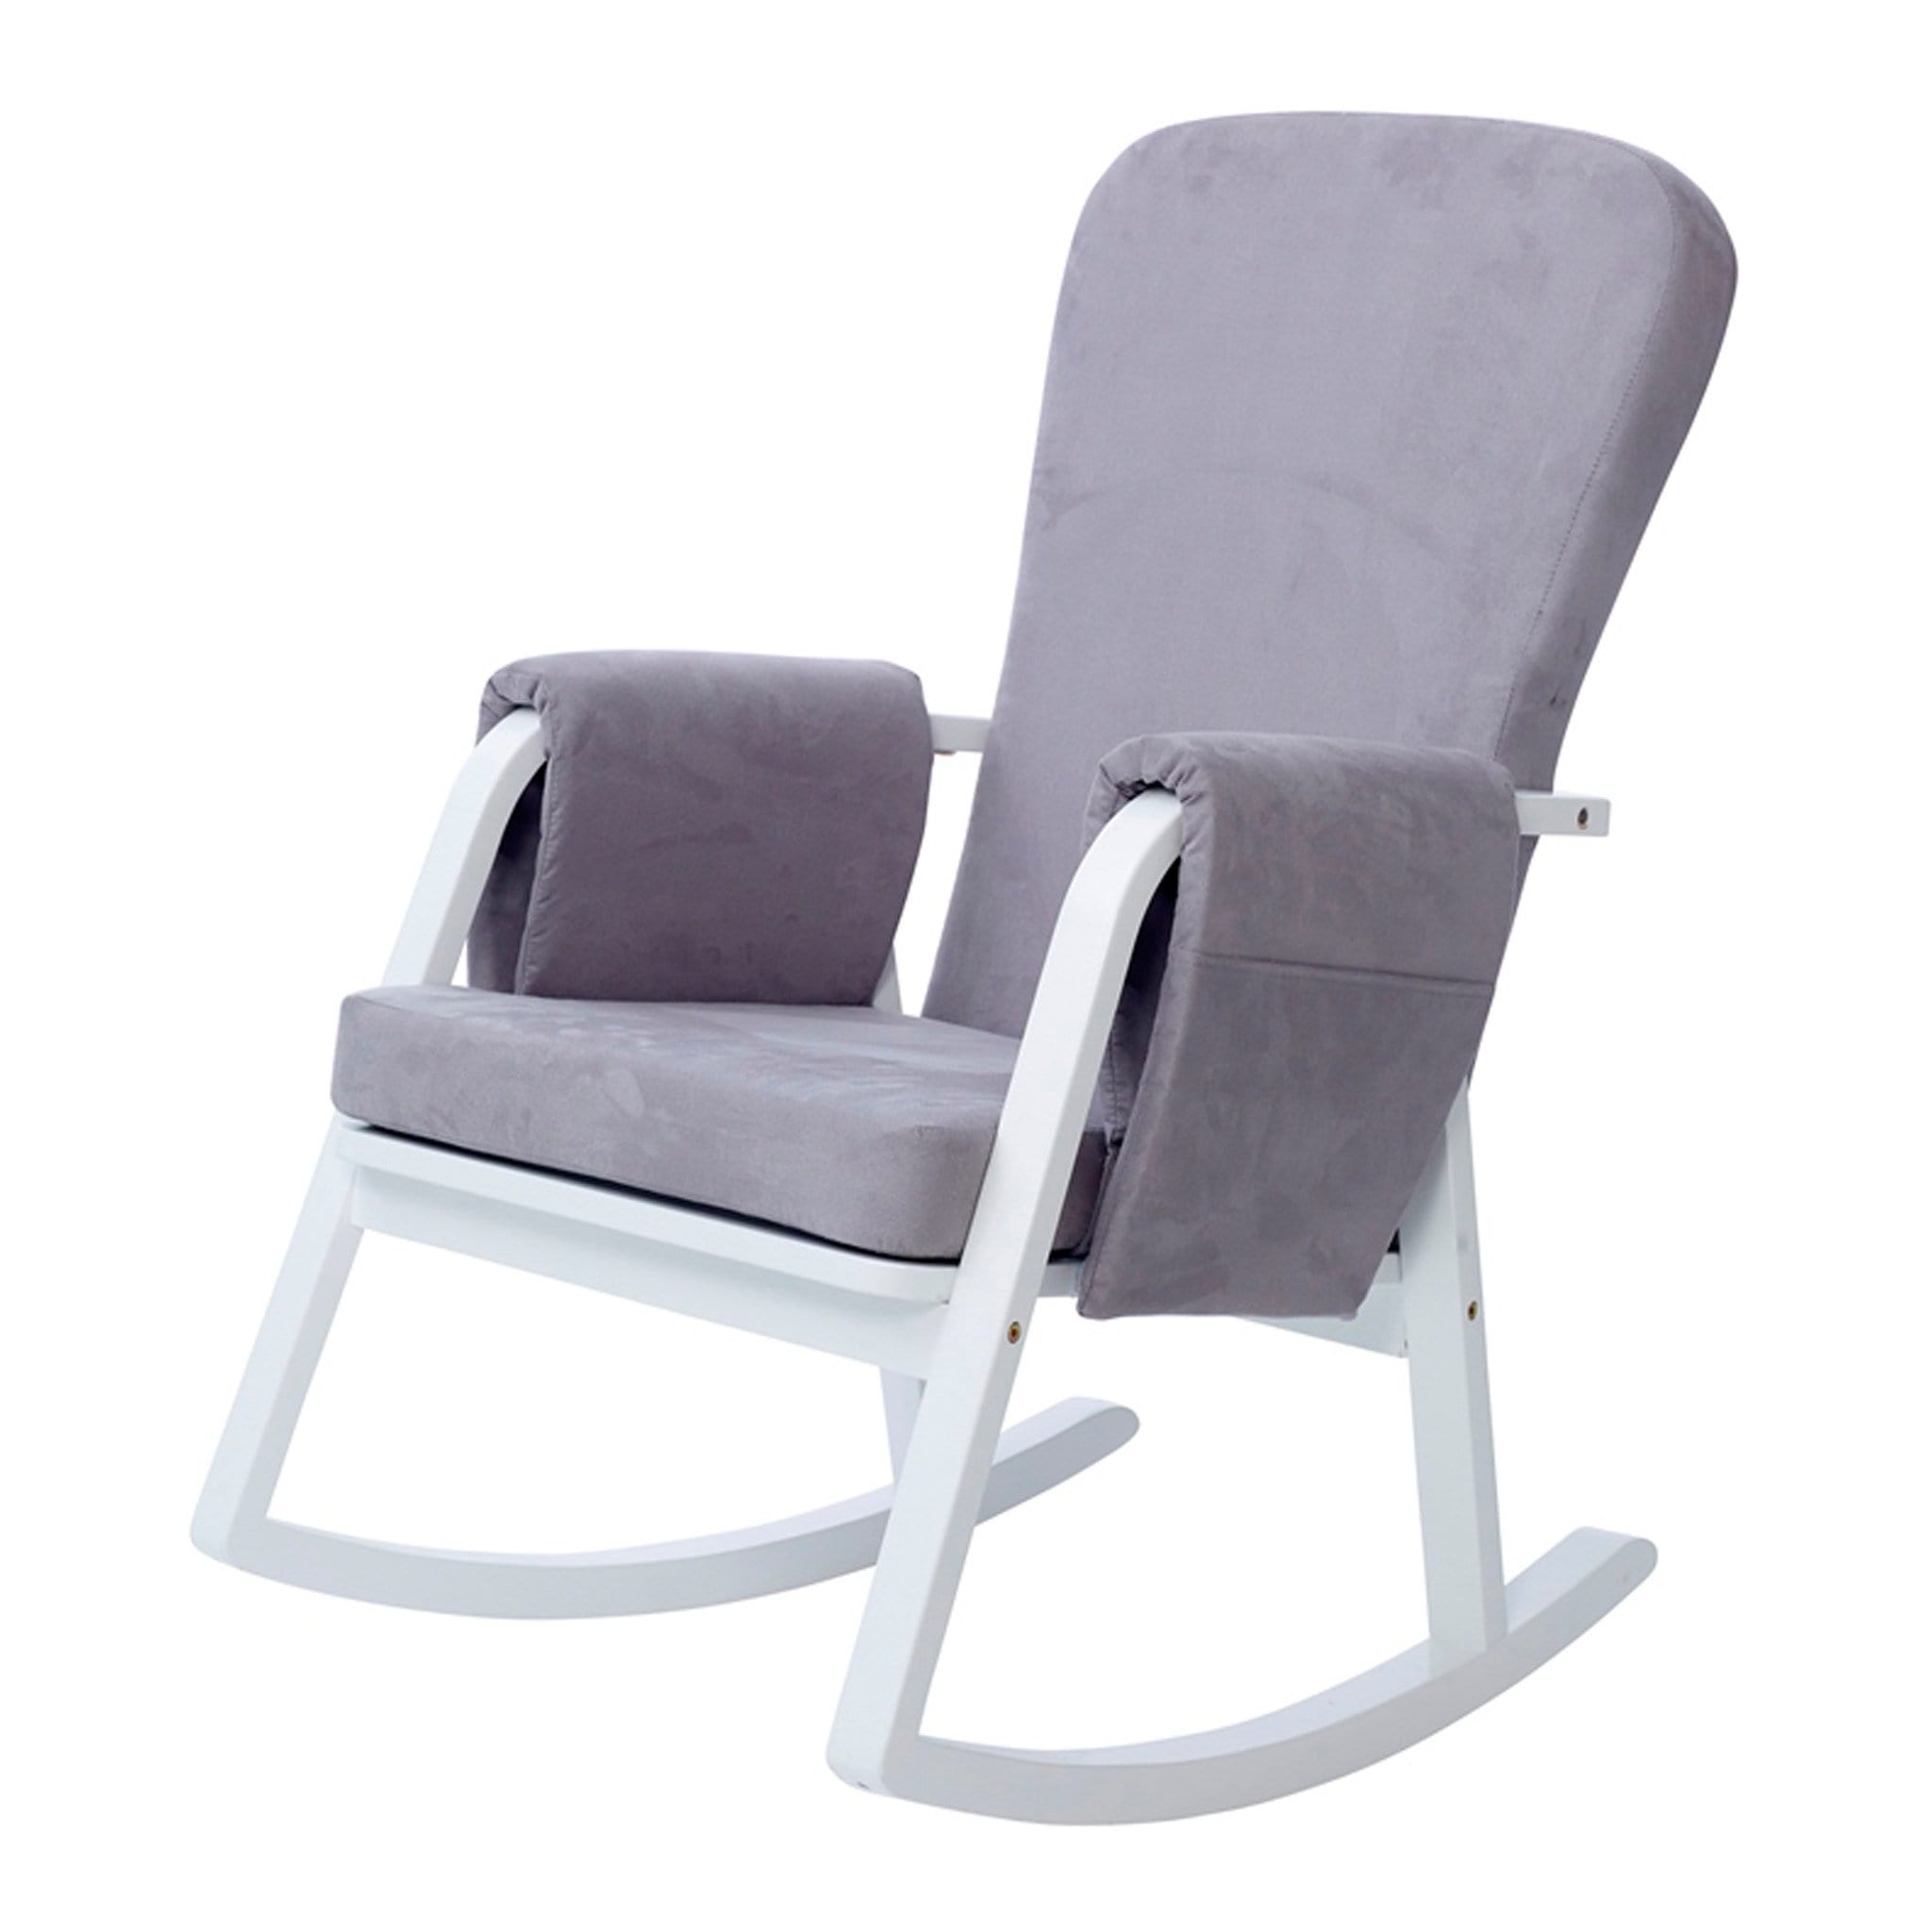 Ickle Bubba nursing chairs Ickle Bubba Dursley Rocking Chair and Stool Pearl Grey 48-005-000-840